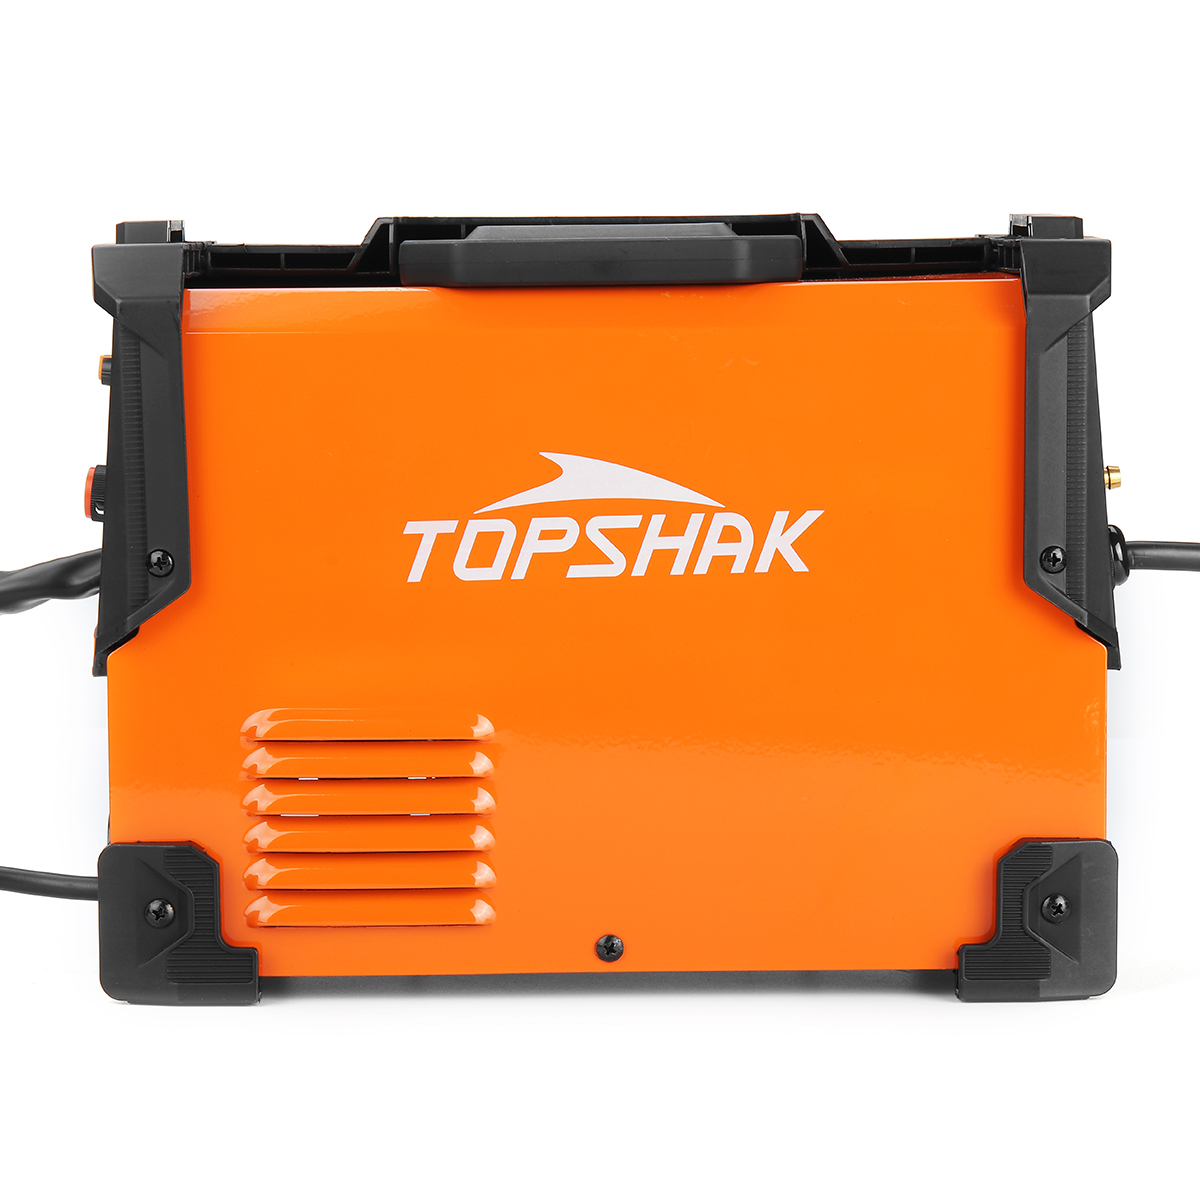 Find Topshak TS EM1 220V 3 in 1 160A Multifunctional Welding Machine with MlG/MAG/FCW/MMA/TIG Welding Tools for Sale on Gipsybee.com with cryptocurrencies